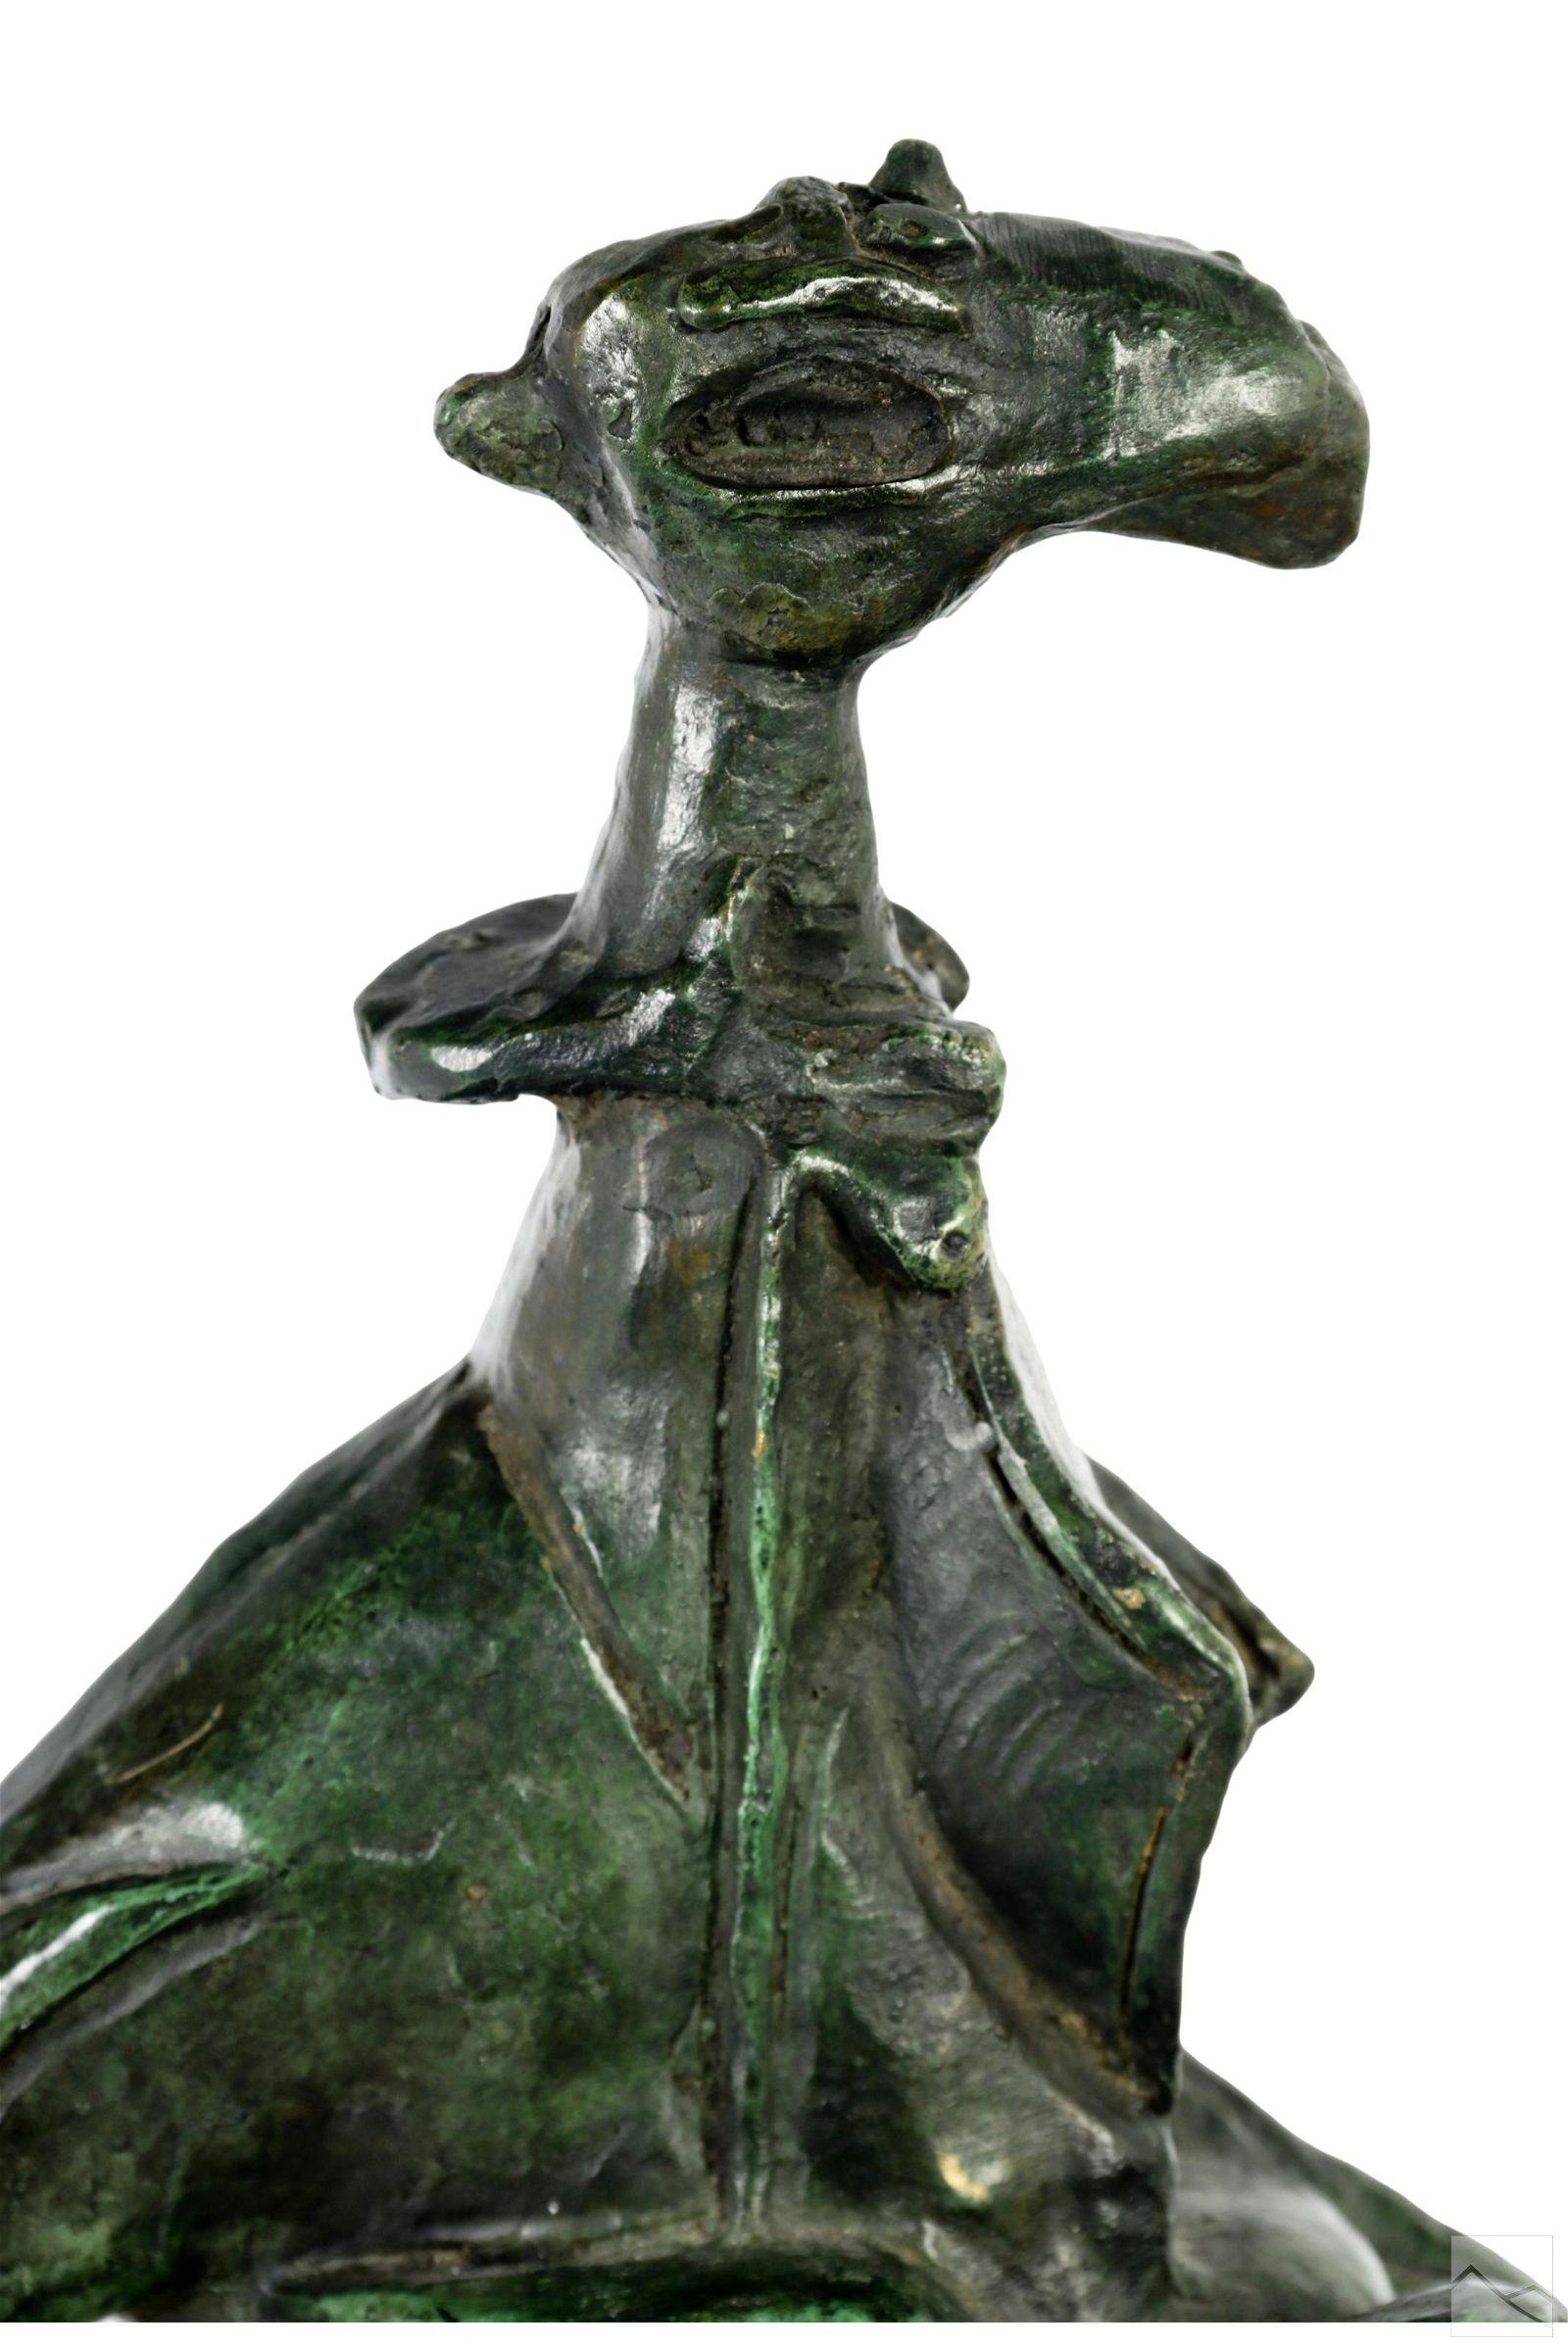 Musician
Patinated bronze sculpture edition 13/30.  Artist signature incised to verso R Tamayo, black granite base.
Rufino Tamayo was born on August 26, 1899, in Oaxaca, Mexico. Orphaned by 1911, he moved to Mexico City to live with an aunt who sent